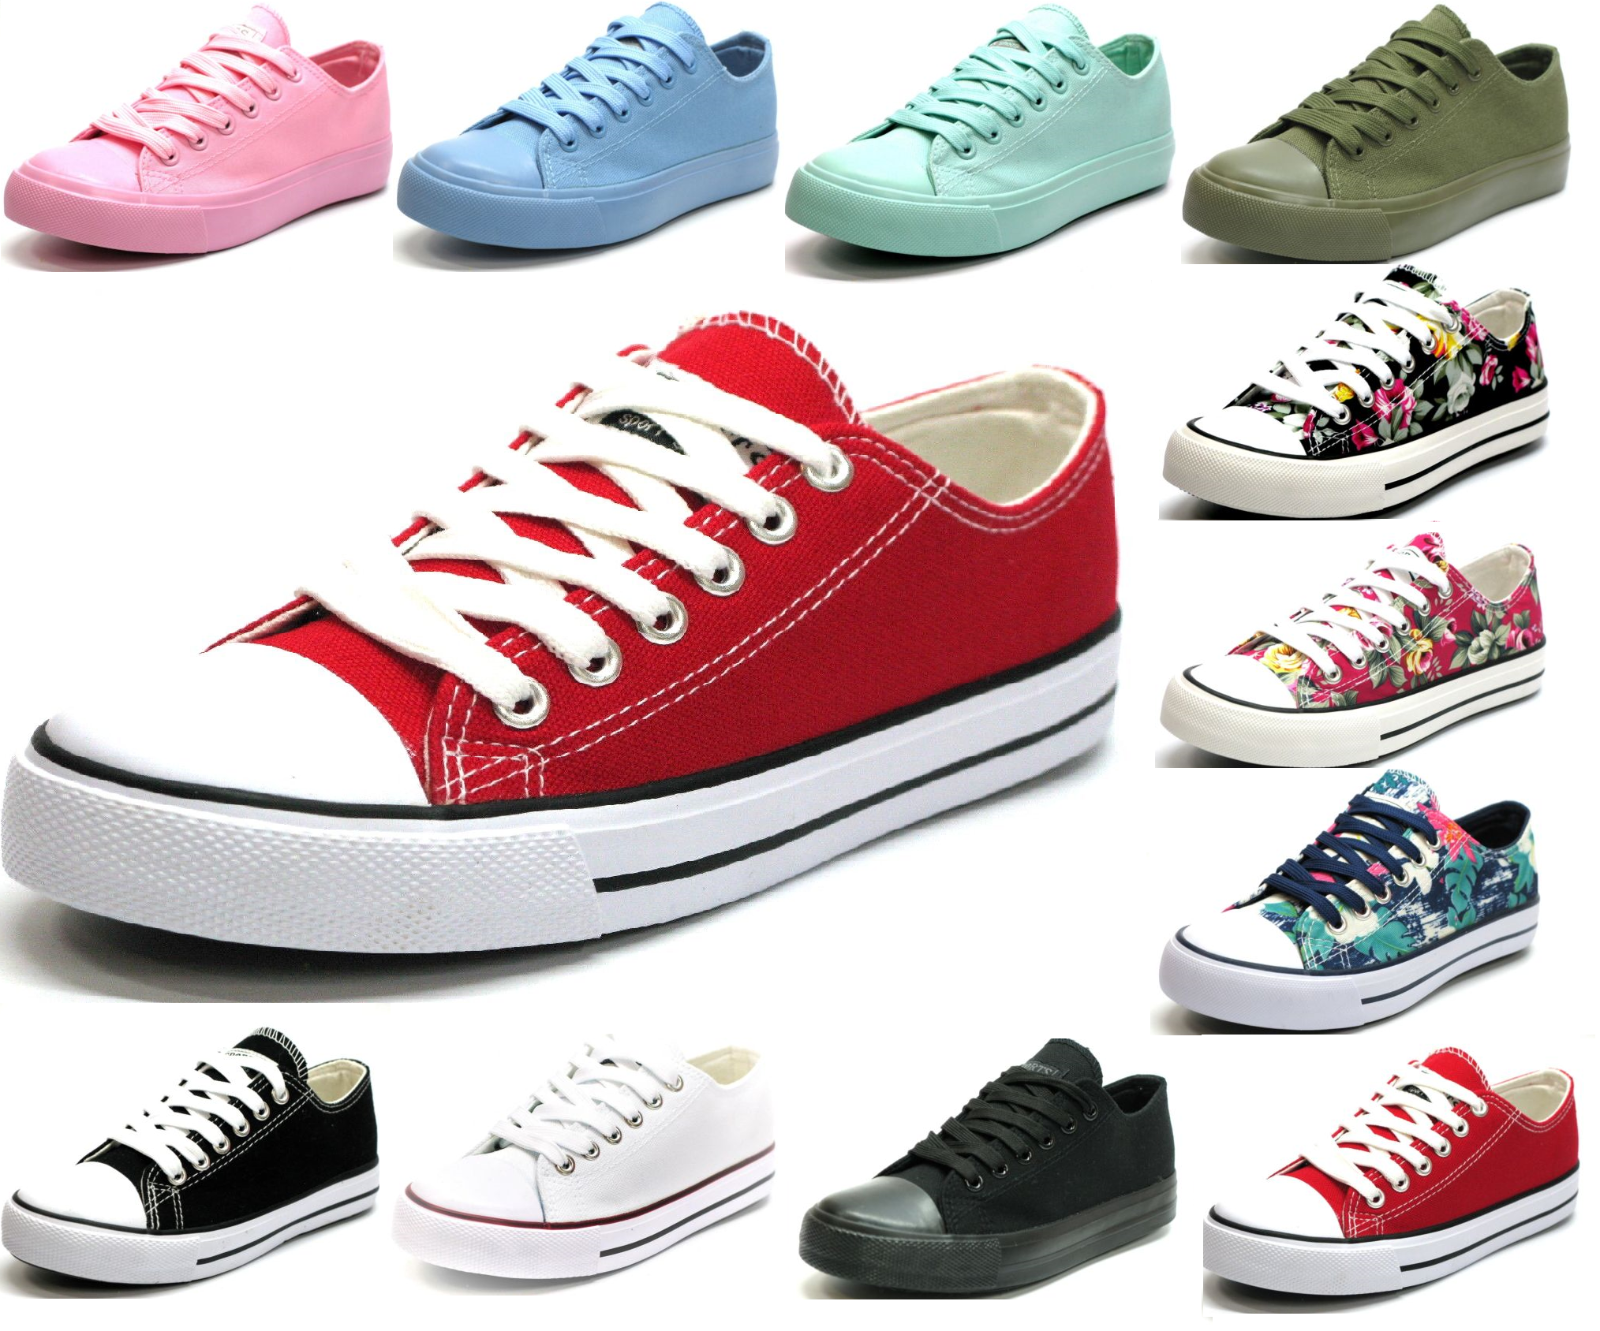 New Womens Girls Classic Lace Up Canvas Shoes Casual Comfort Sneakers 11 Colors